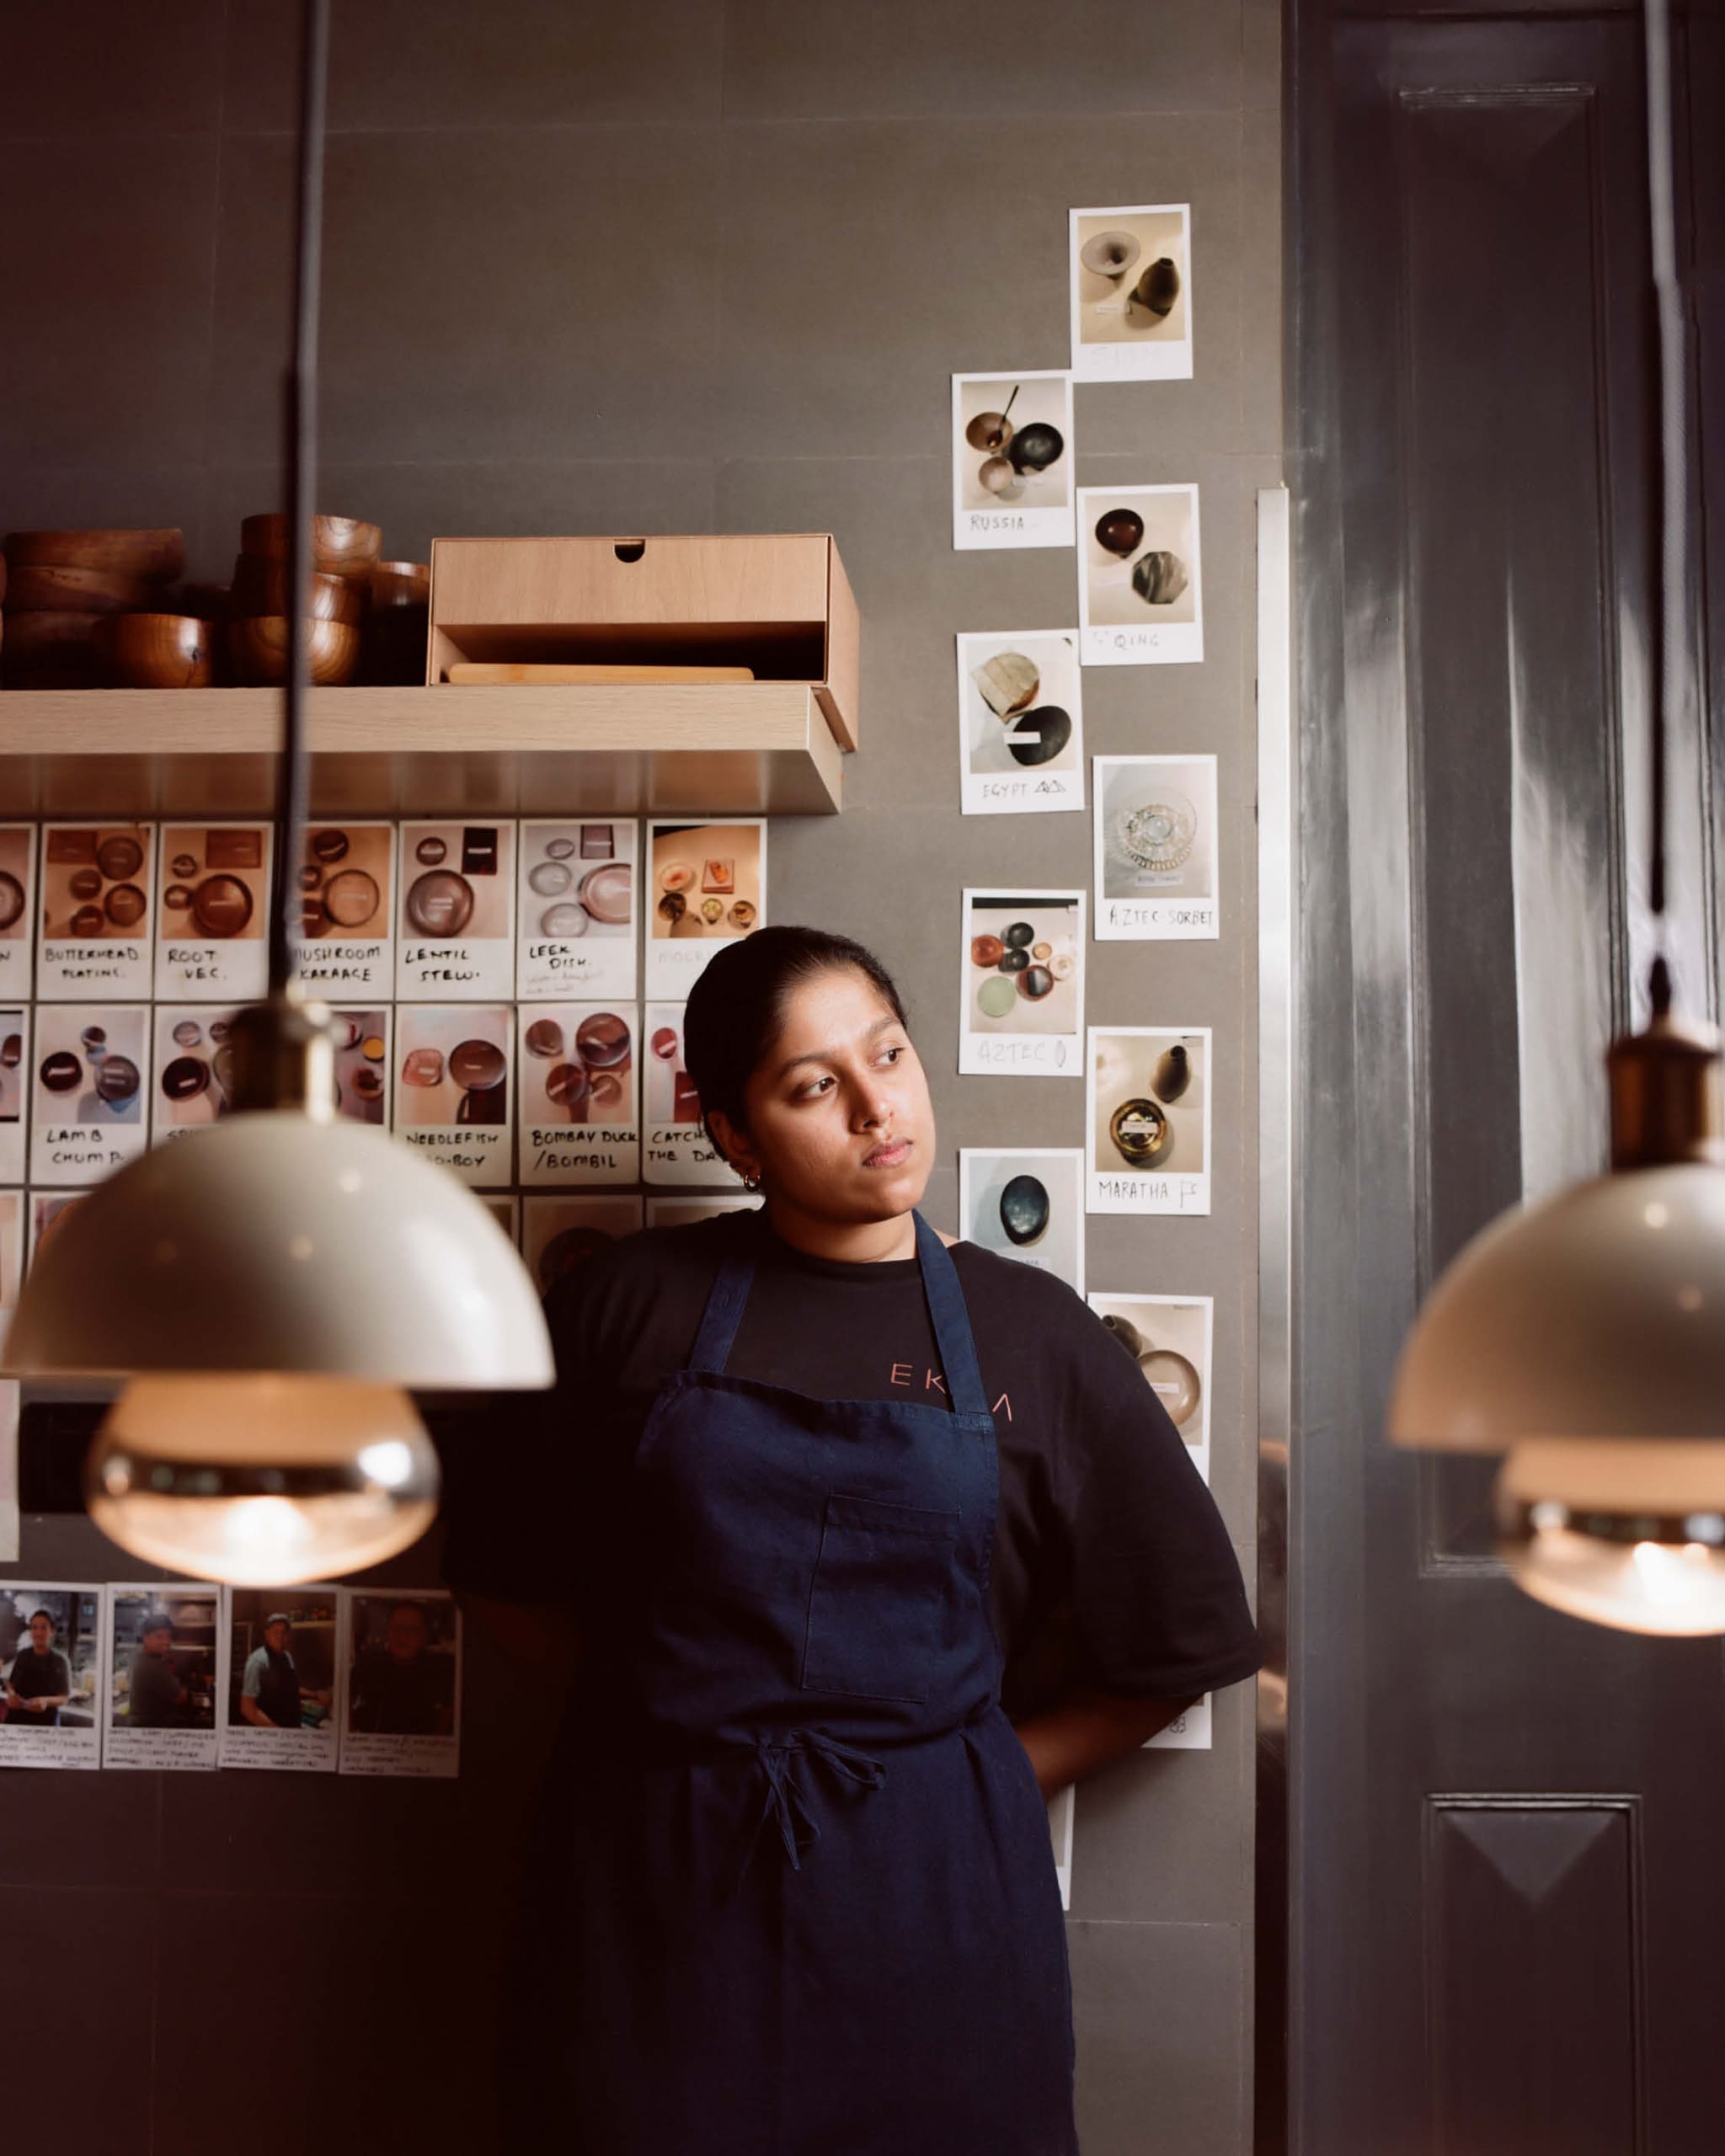 Niyati Rao, chef and co-owner of Ekaa, leaning against a wall in the restaurant.